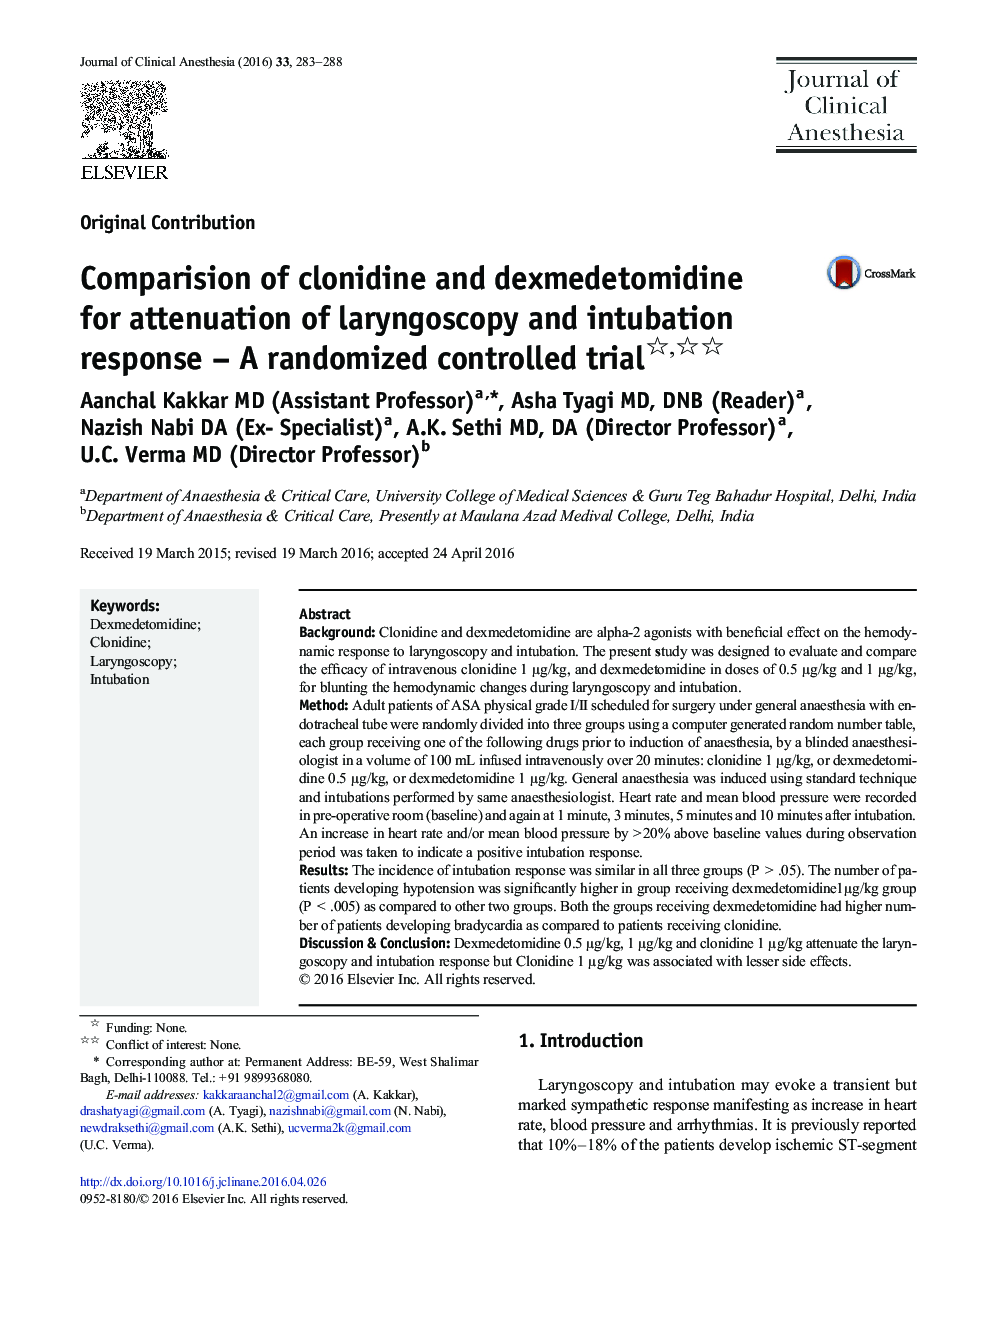 Comparision of clonidine and dexmedetomidine for attenuation of laryngoscopy and intubation response – A randomized controlled trial 